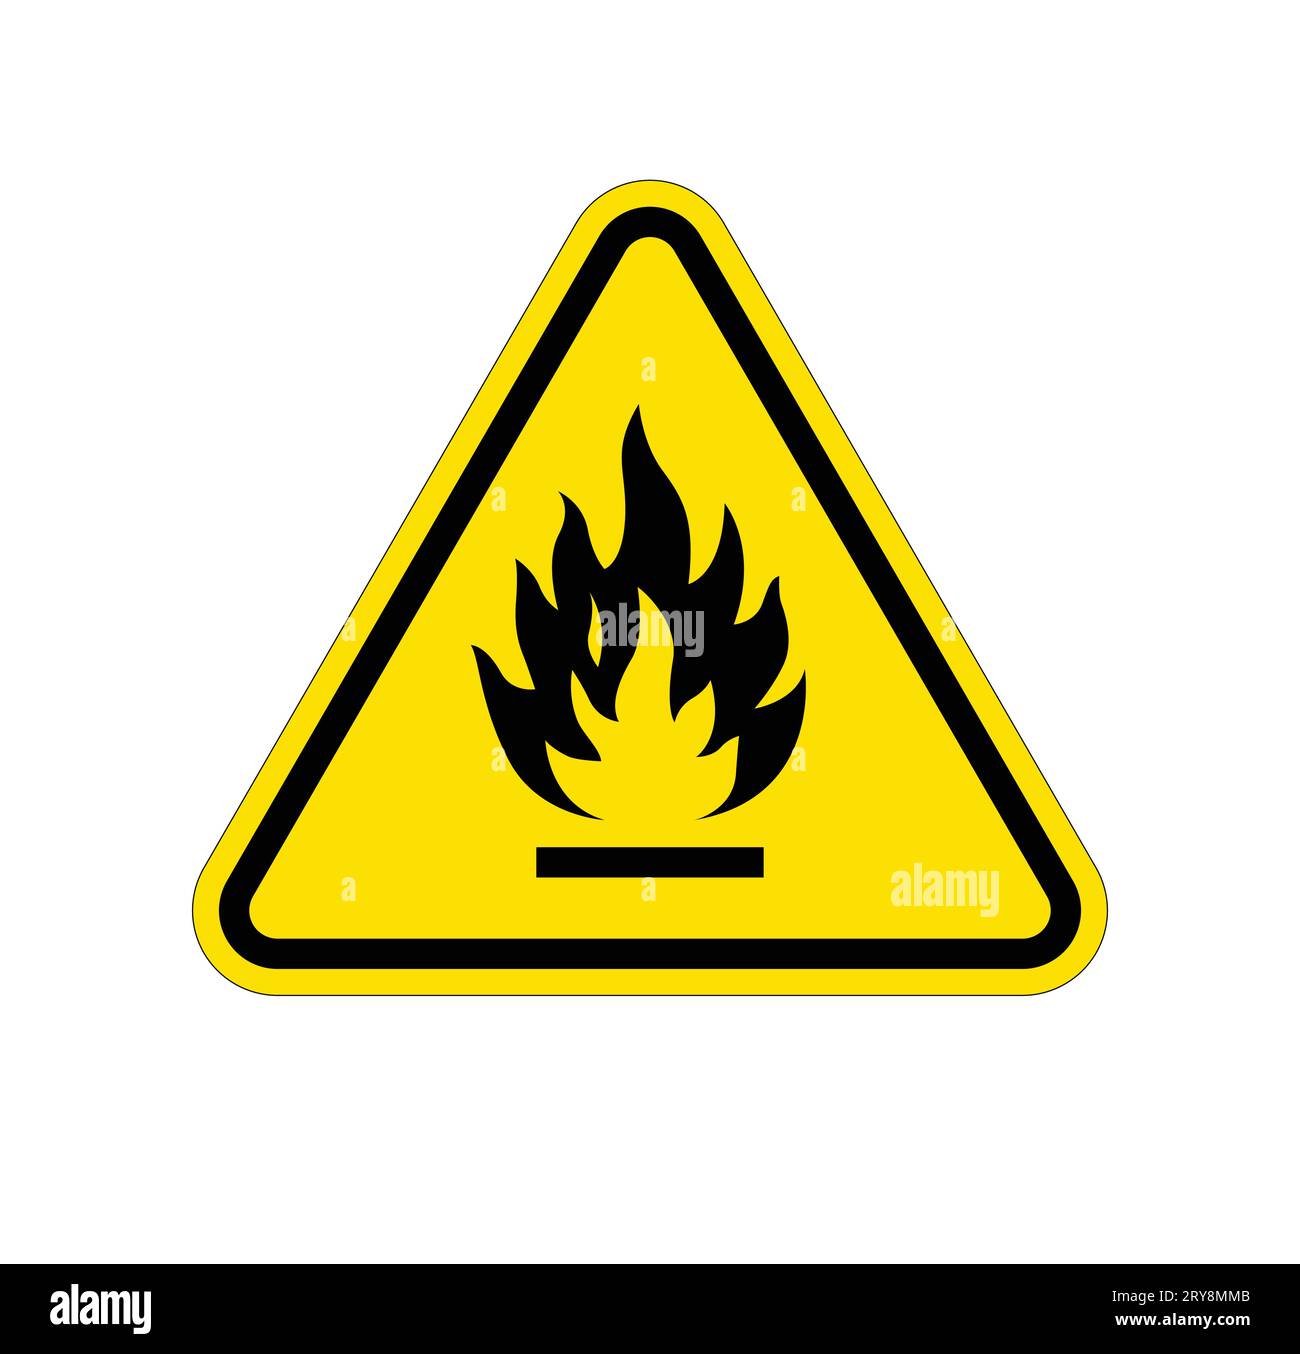 classic industrial flammable yellow warning danger triangle sign symbol ...